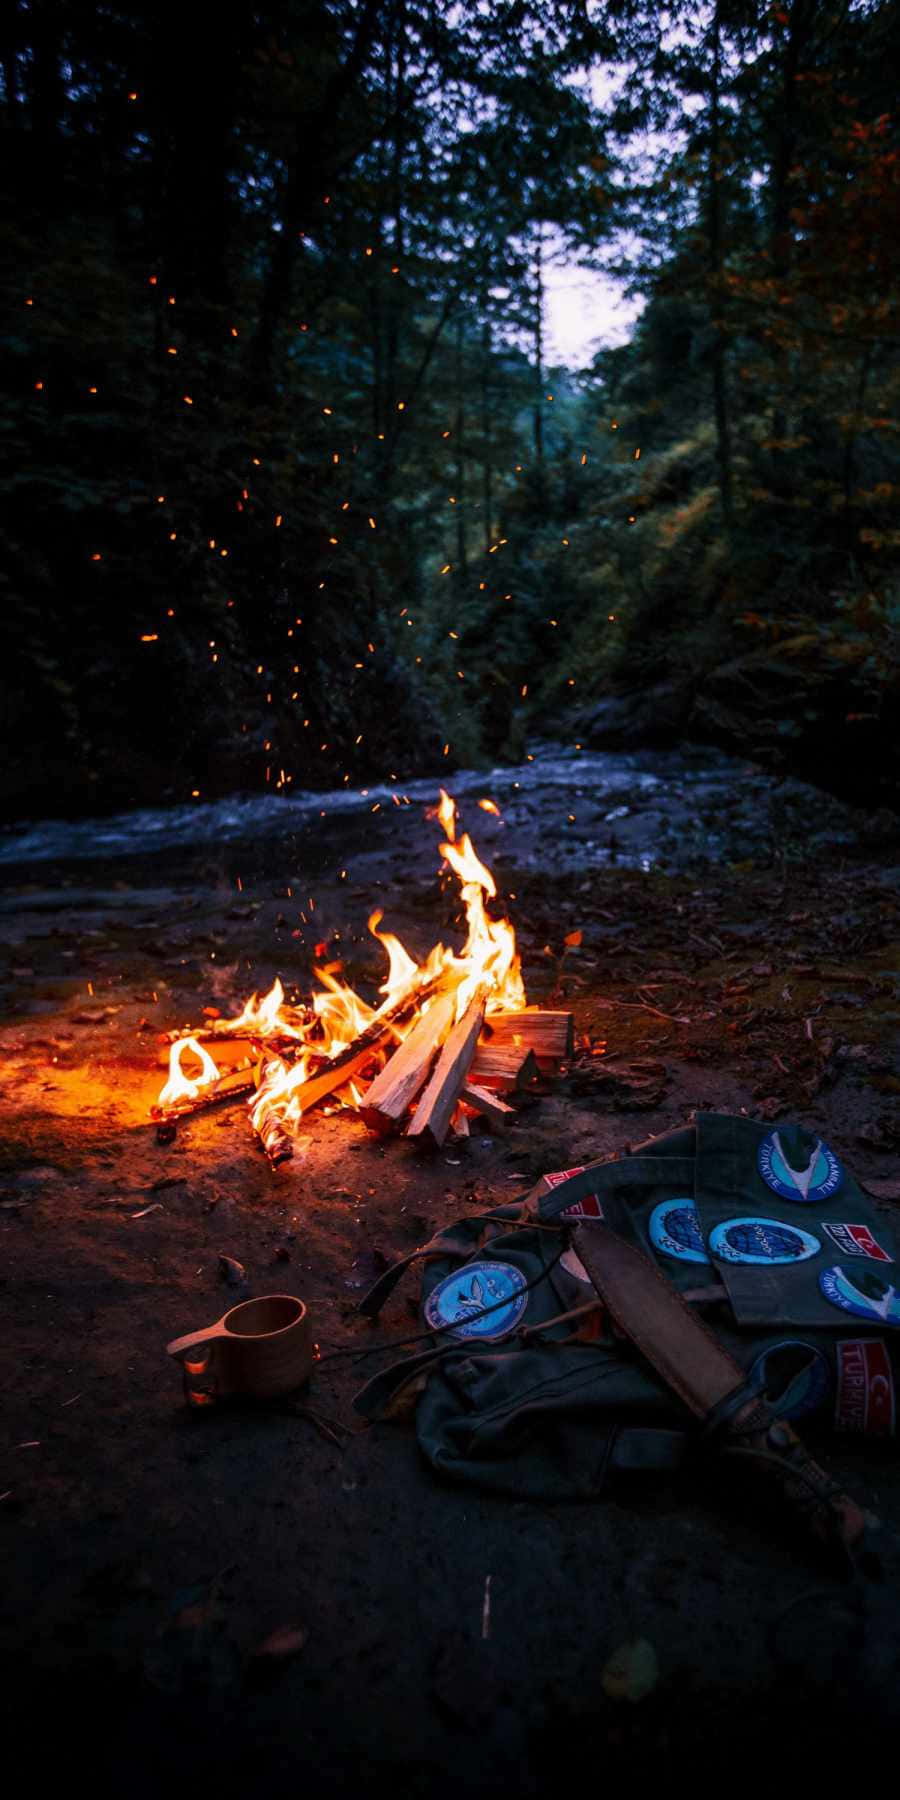 A campfire in the woods with the woods surrounding it. - Camping